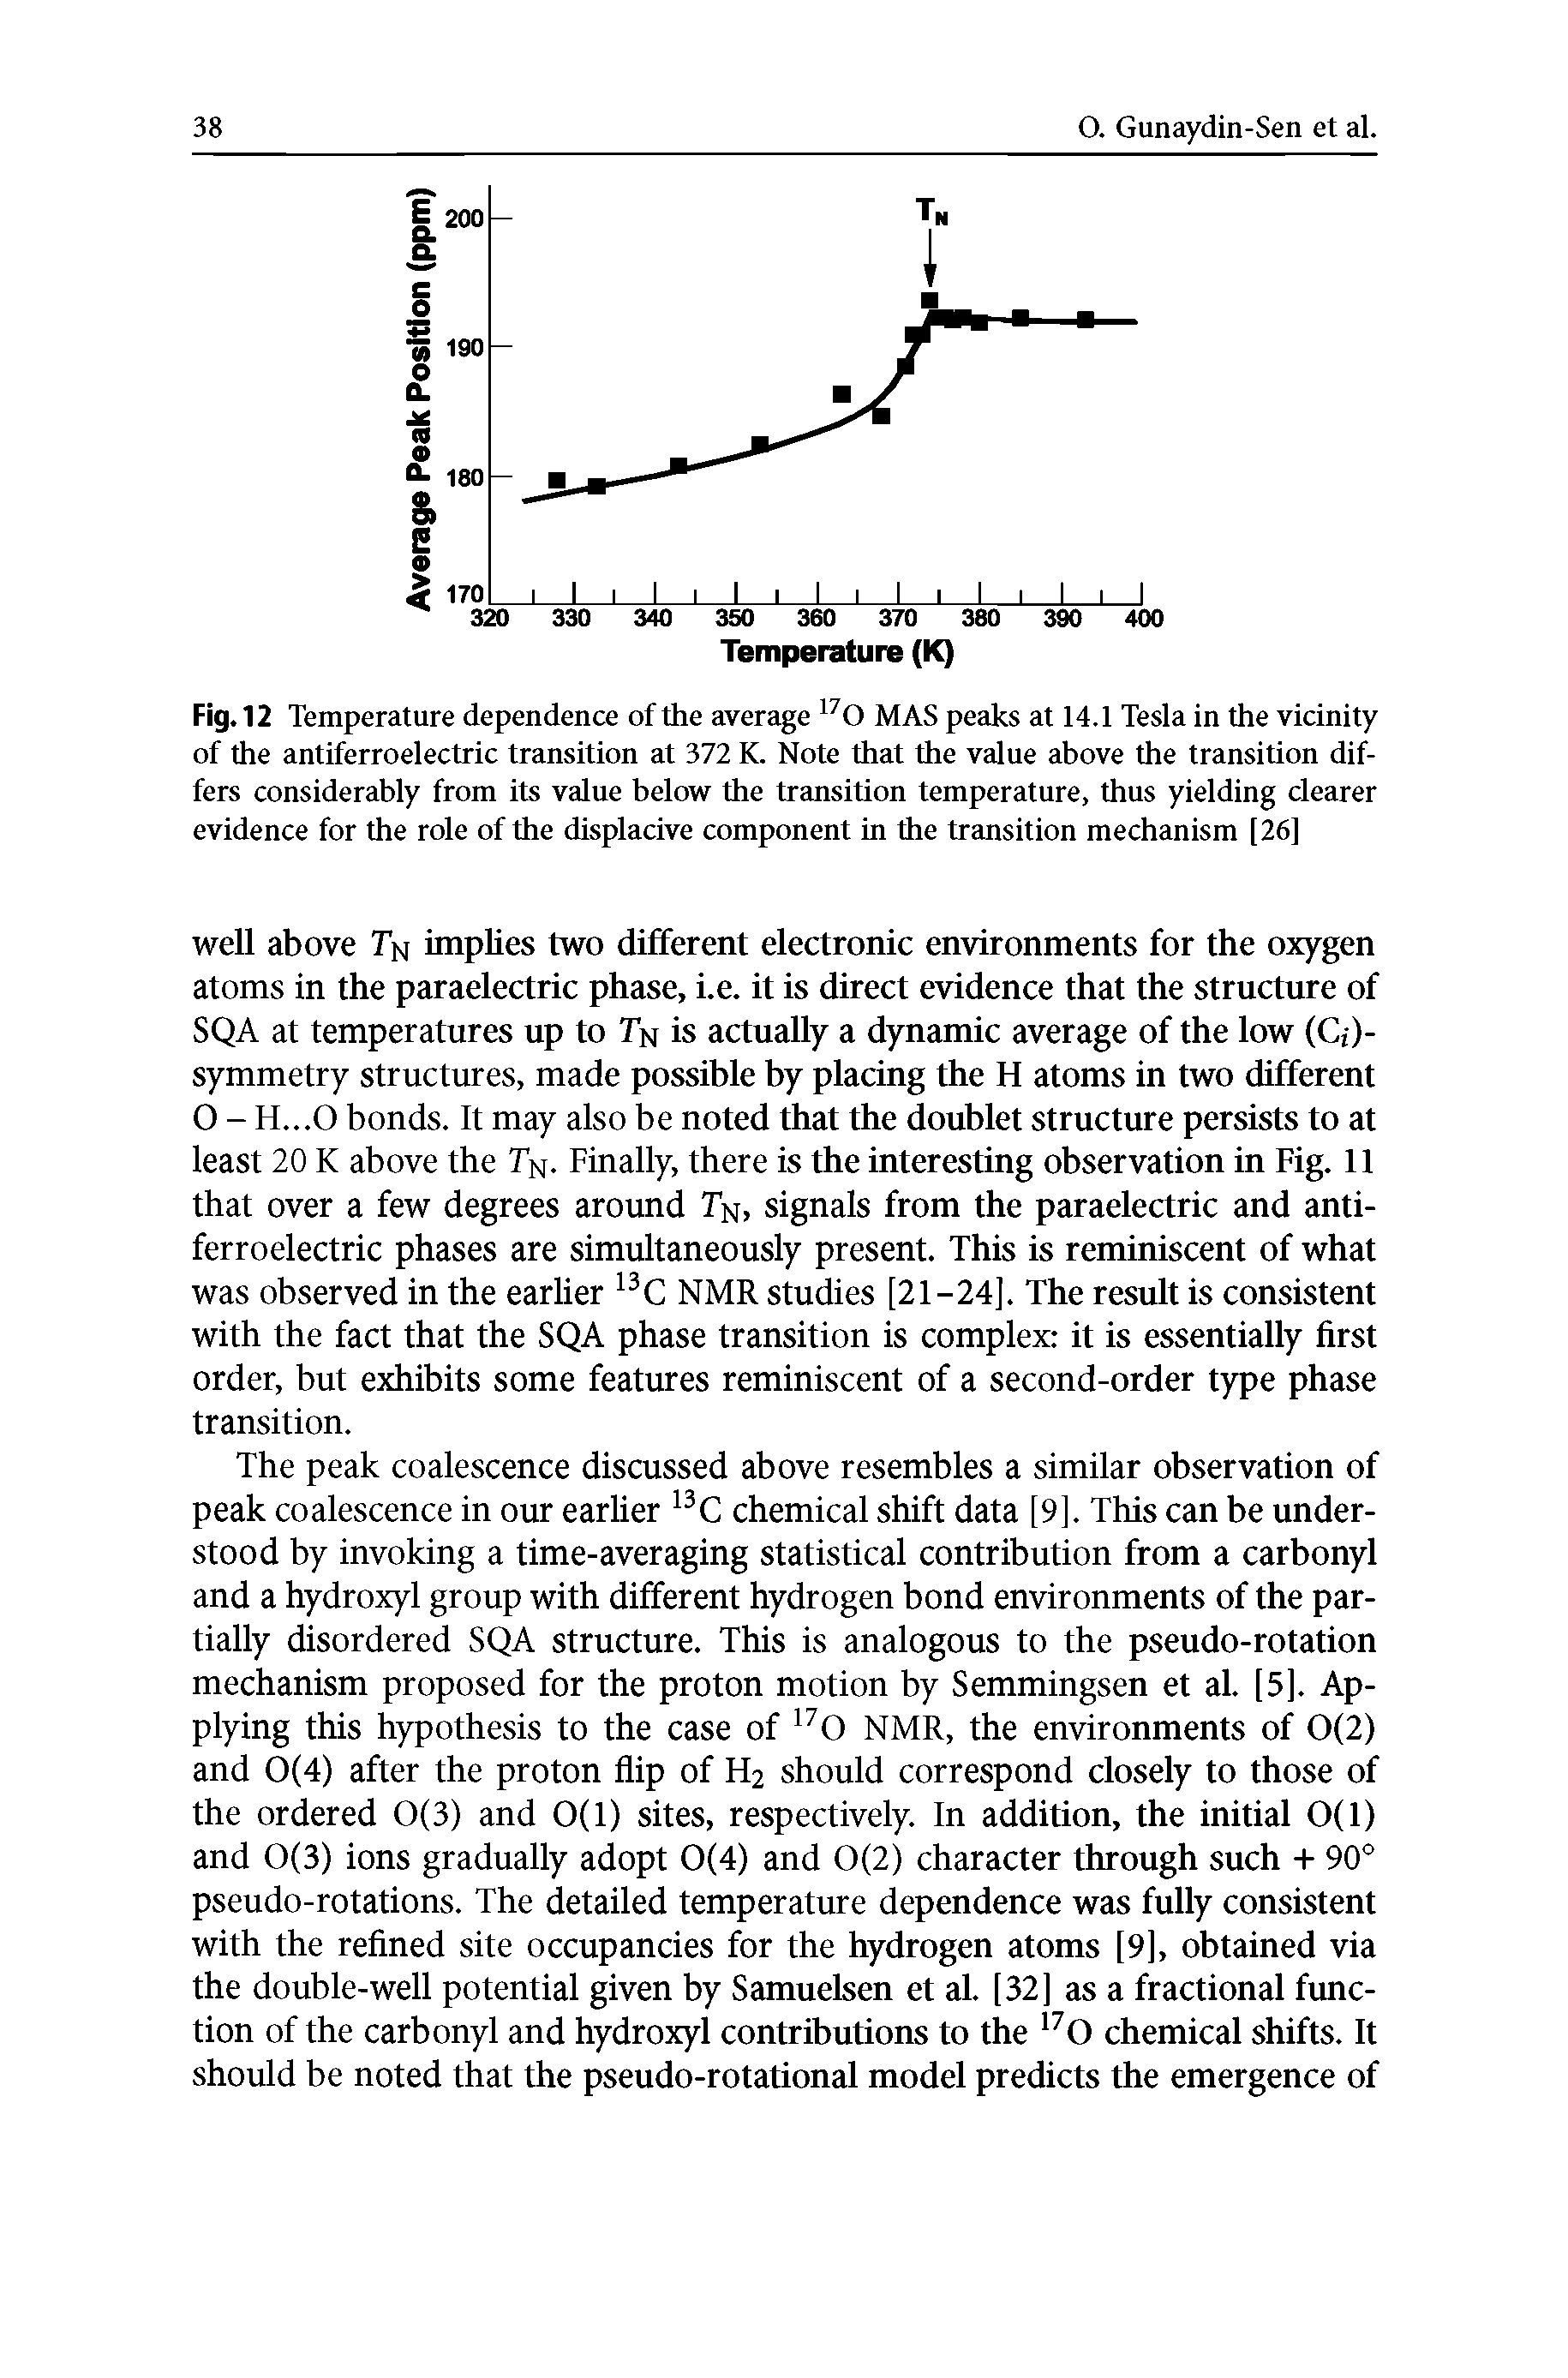 Fig. 12 Temperature dependence of the average MAS peaks at 14.1 Tesla in the vicinity of the antiferroelectric transition at 372 K. Note that the value above the transition differs considerably from its value below the transition temperature, thus yielding clearer evidence for the role of the displacive component in the transition mechanism [26]...